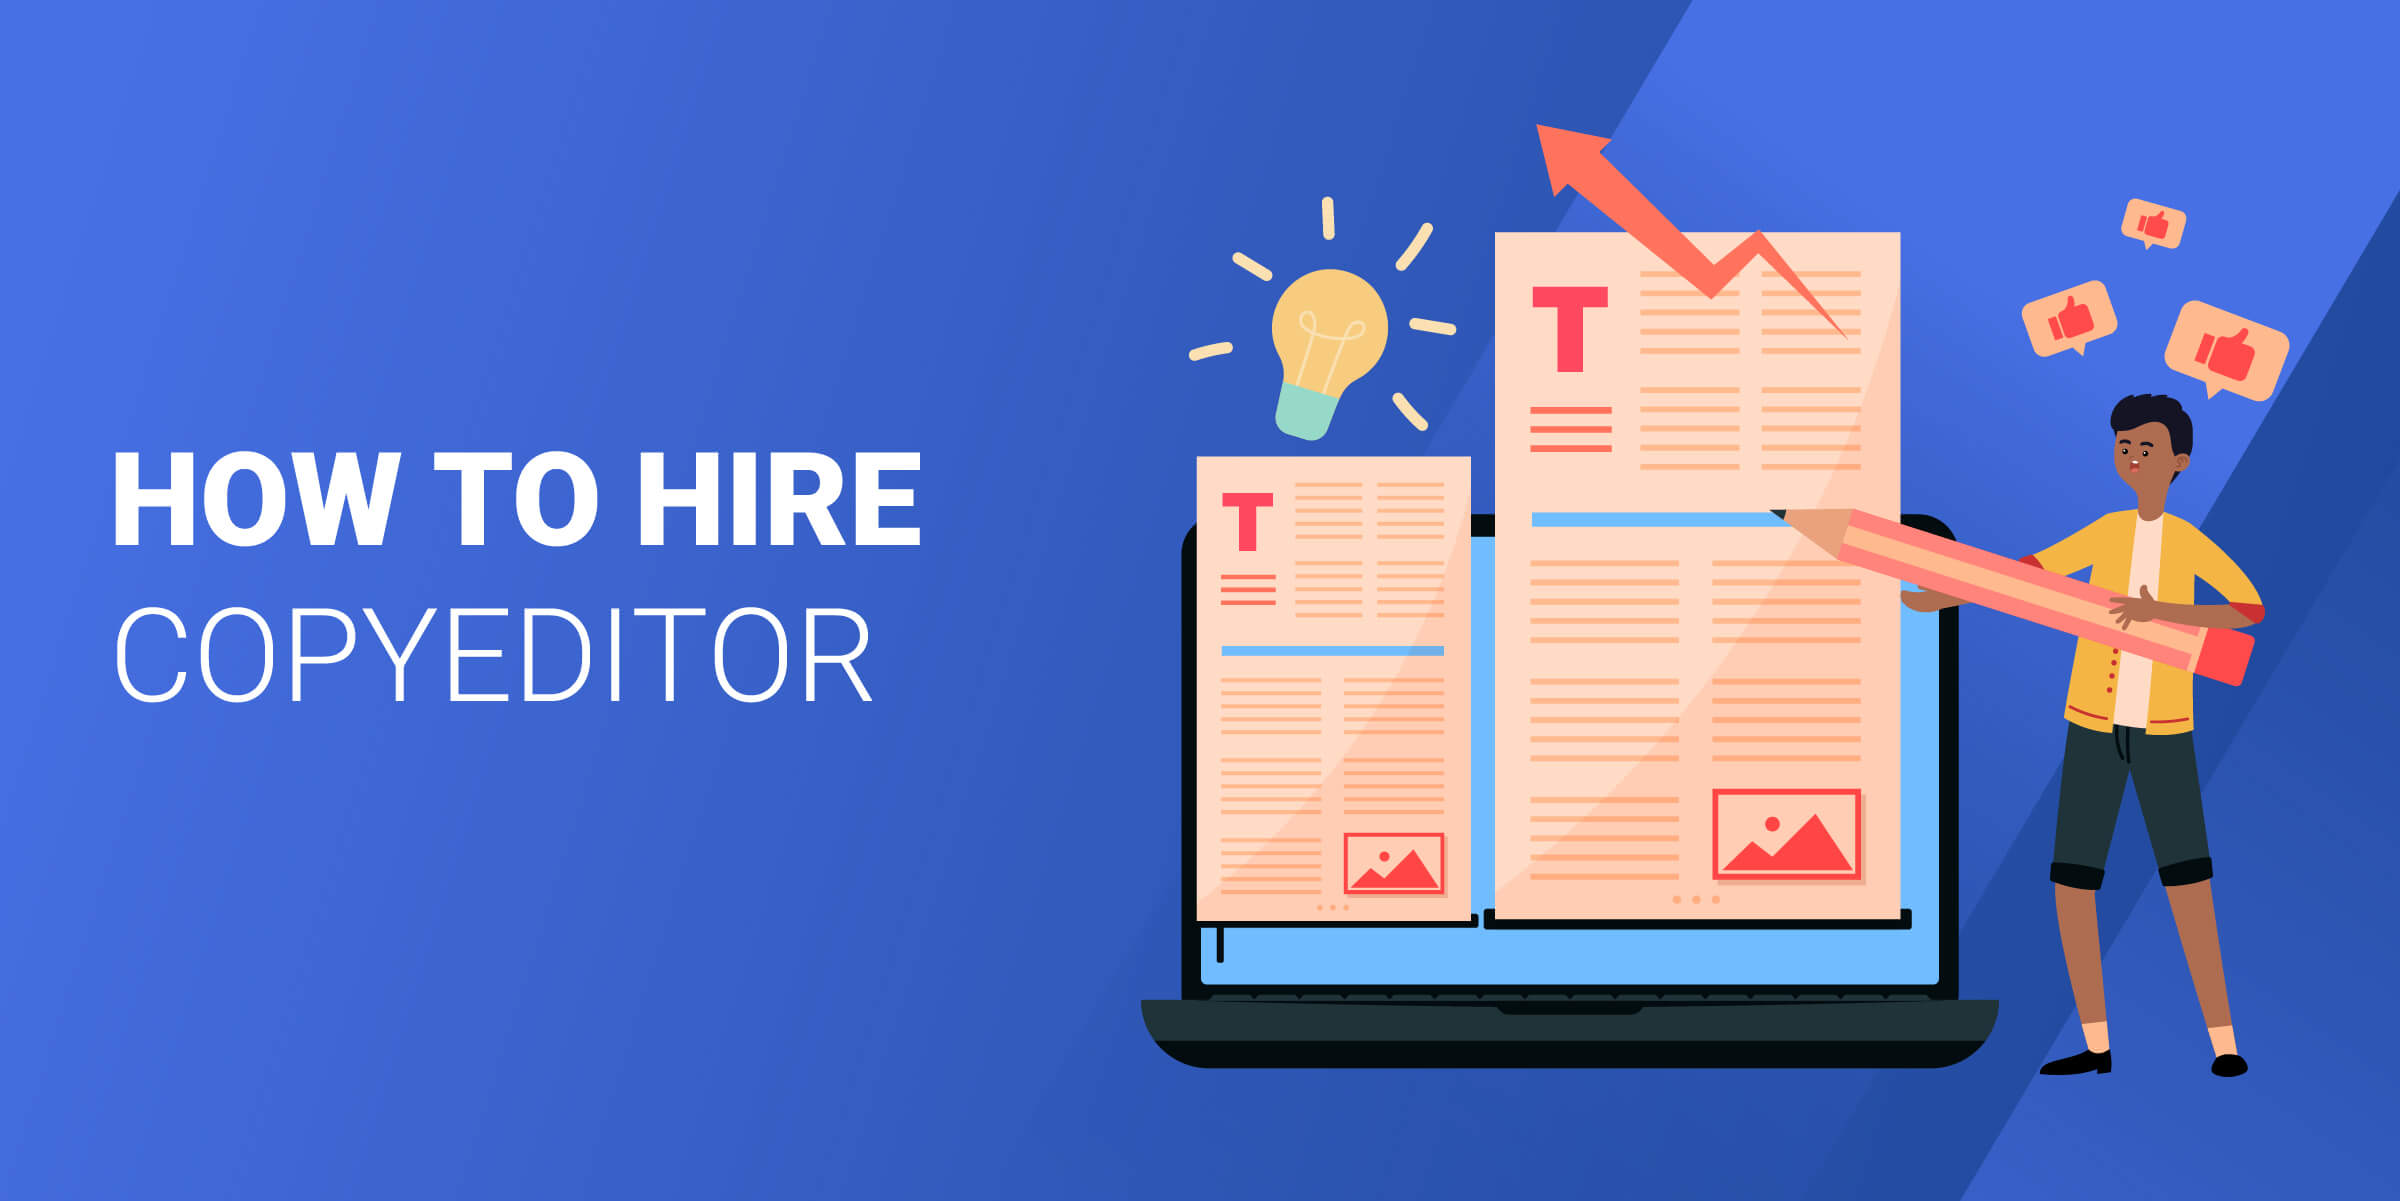 How to Hire Copyeditor